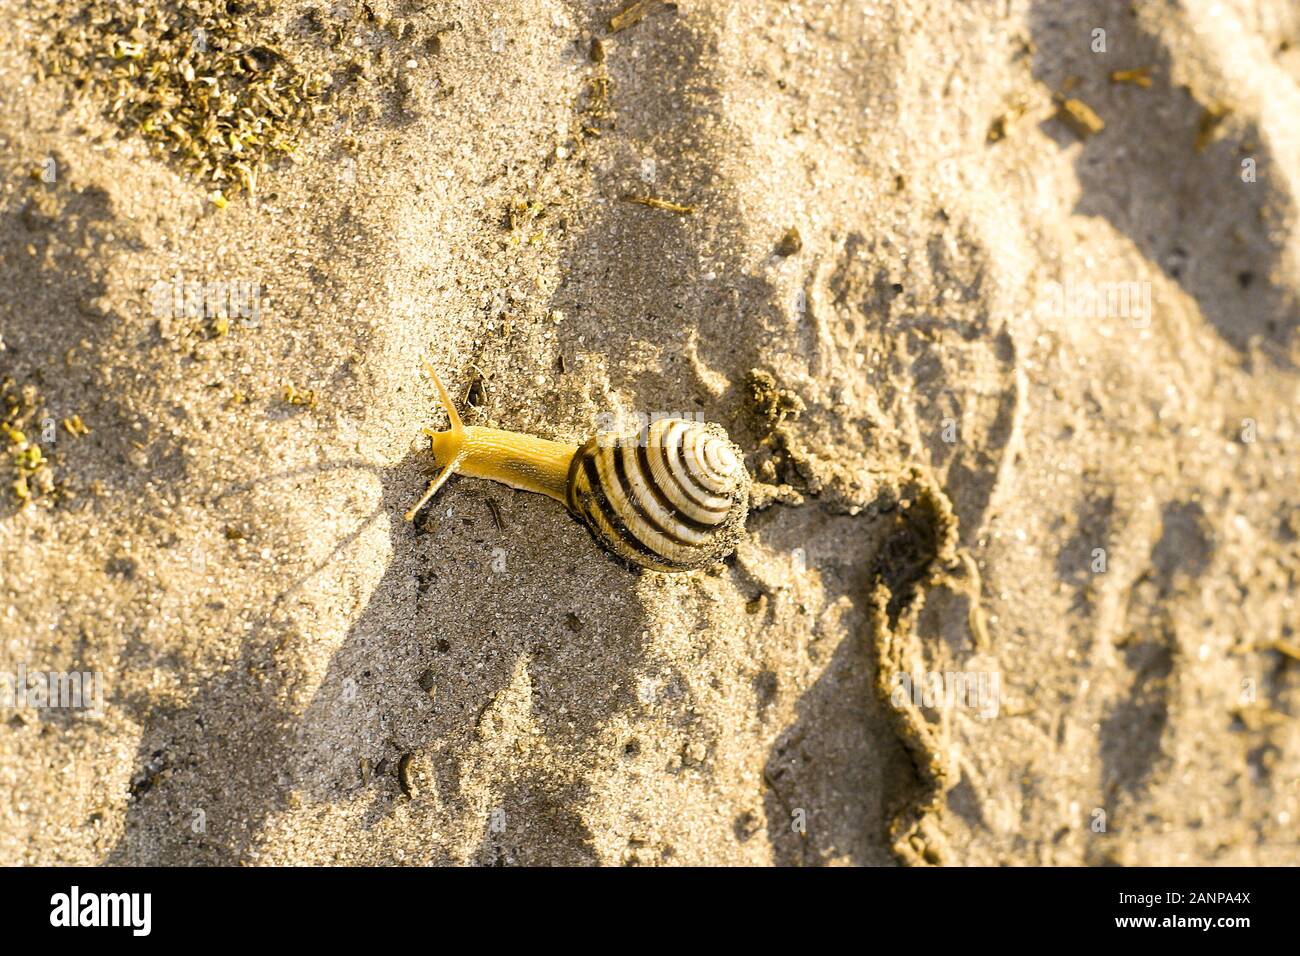 Snail crawl somewhere on sand alone leave a wet mark Stock Photo